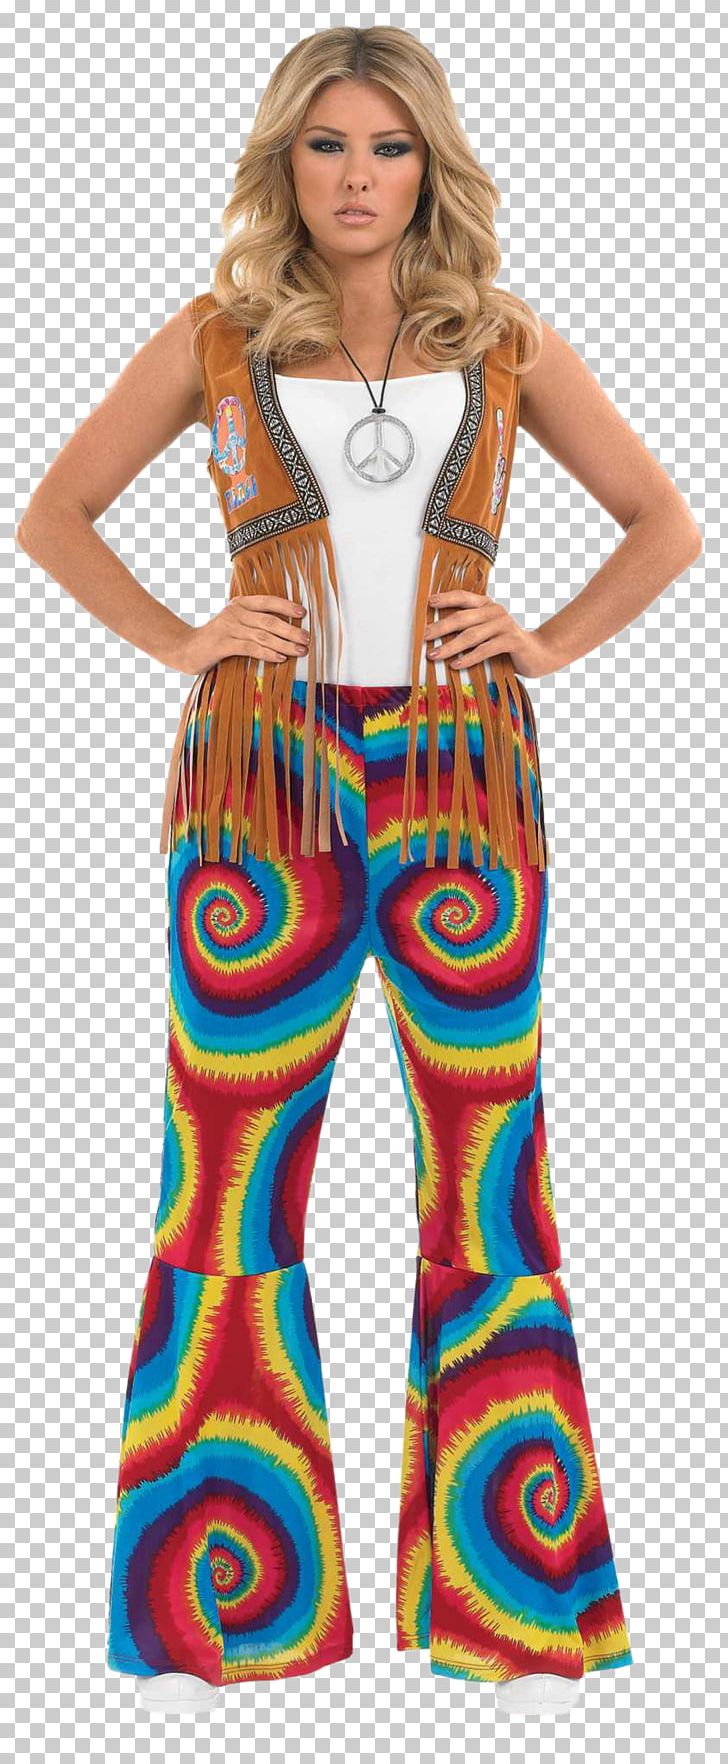 1970s Costume Party 1960s 1950s PNG, Clipart, 1950s, 1960s, 1970s, Bellbottoms, Clothing Free PNG Download